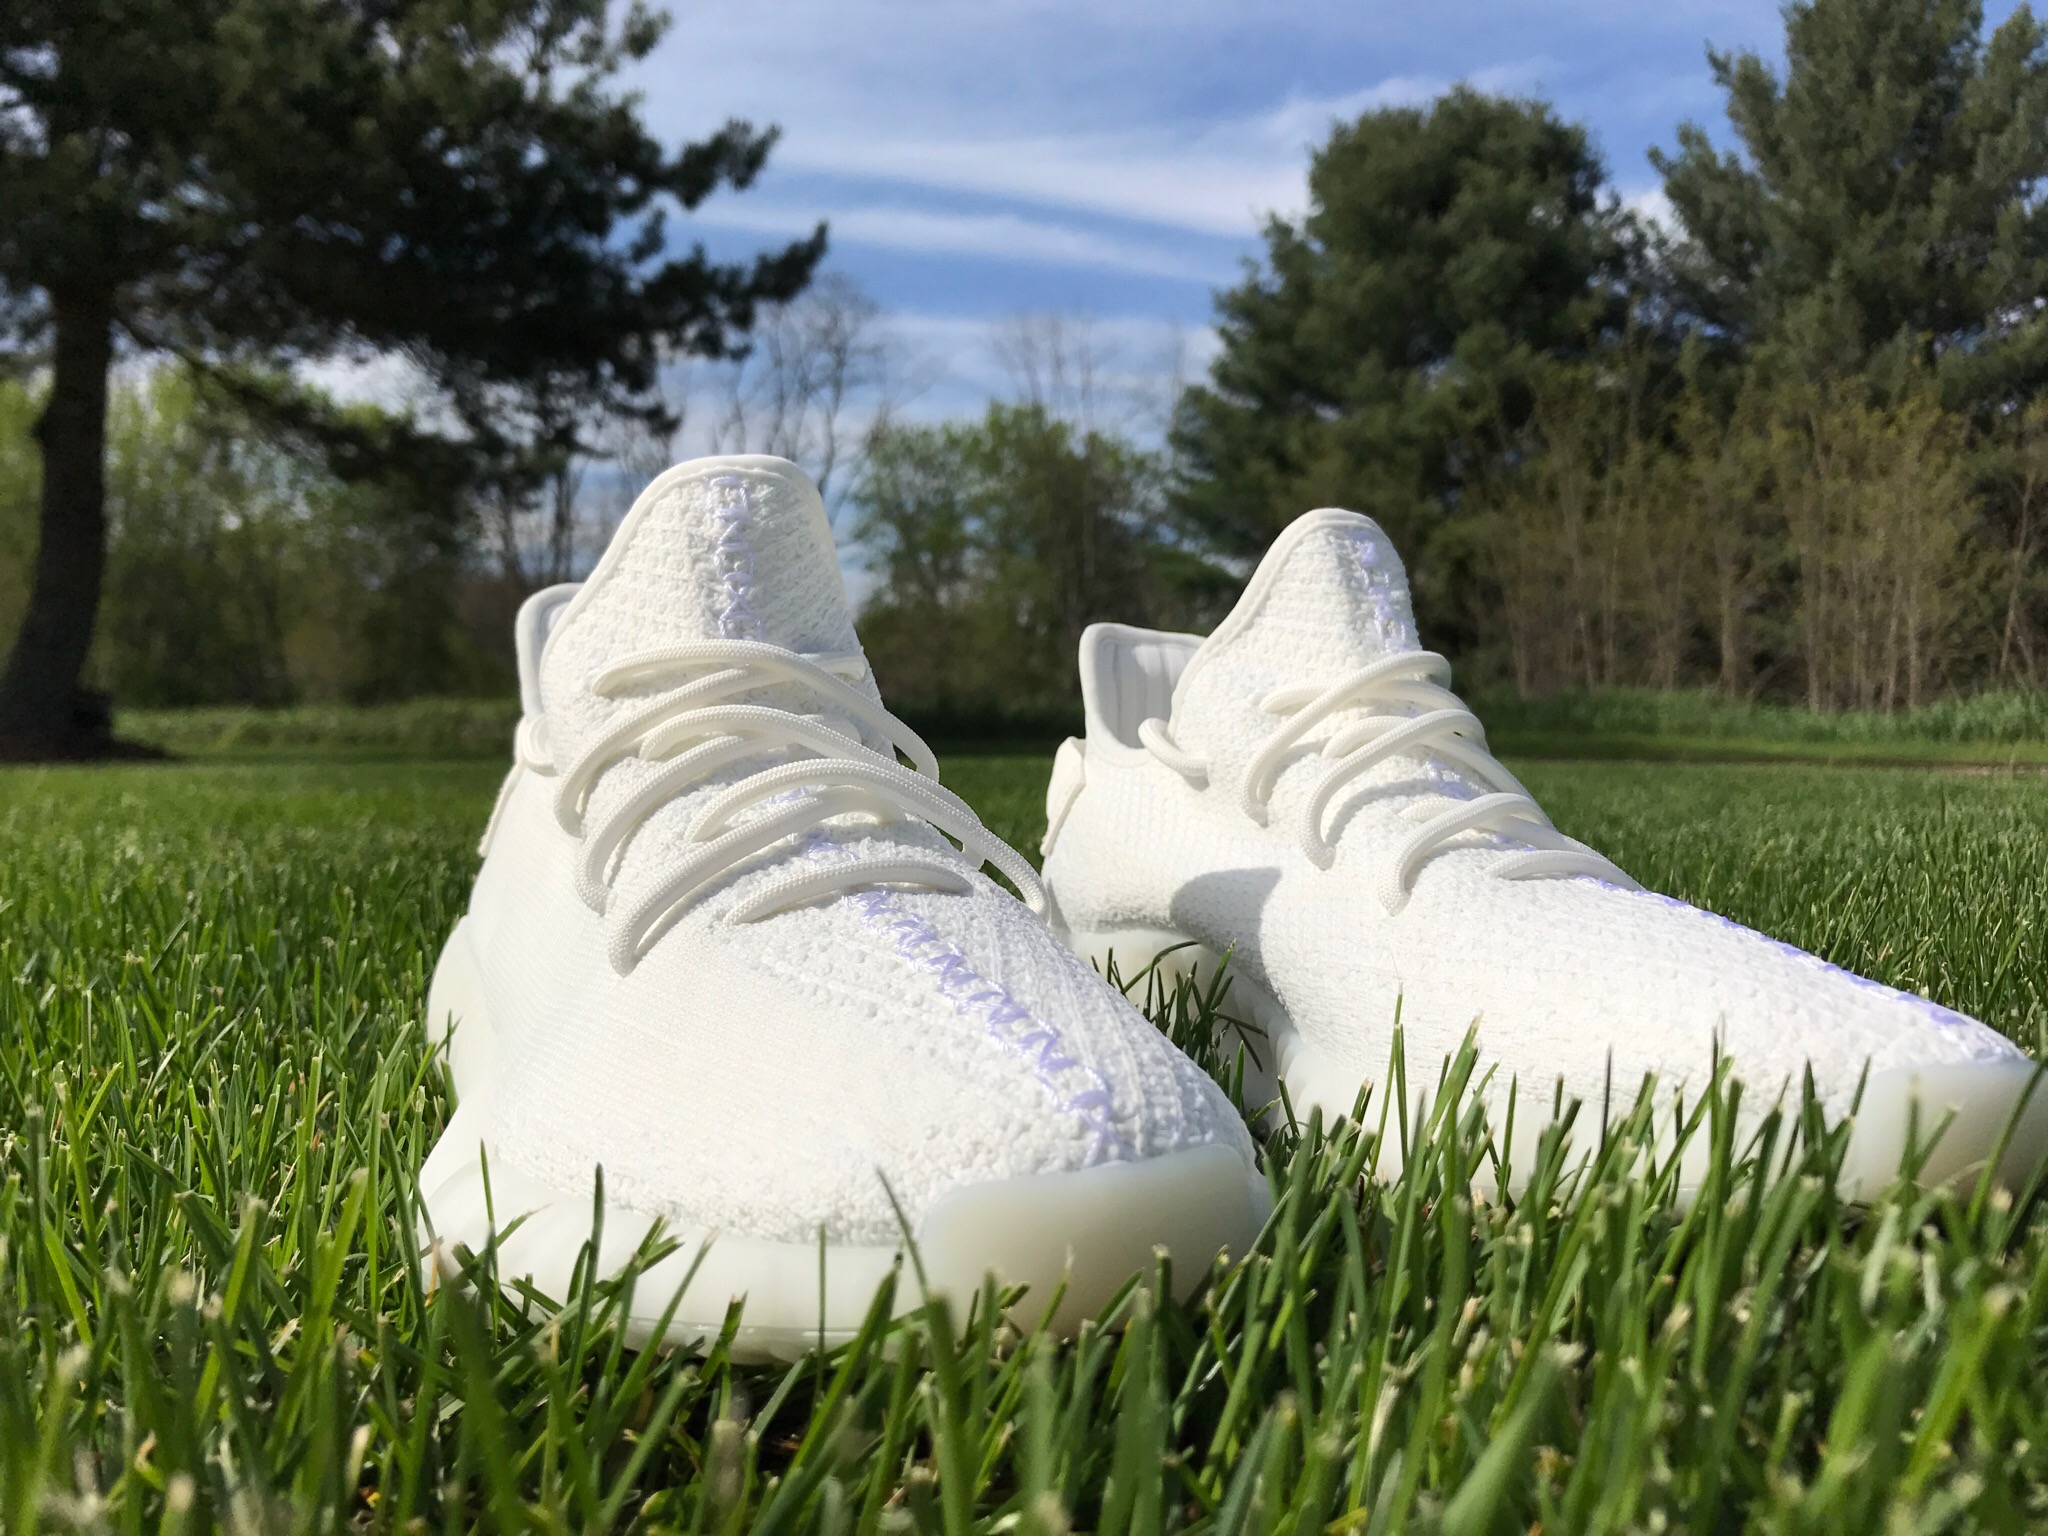 yeezy golf shoes